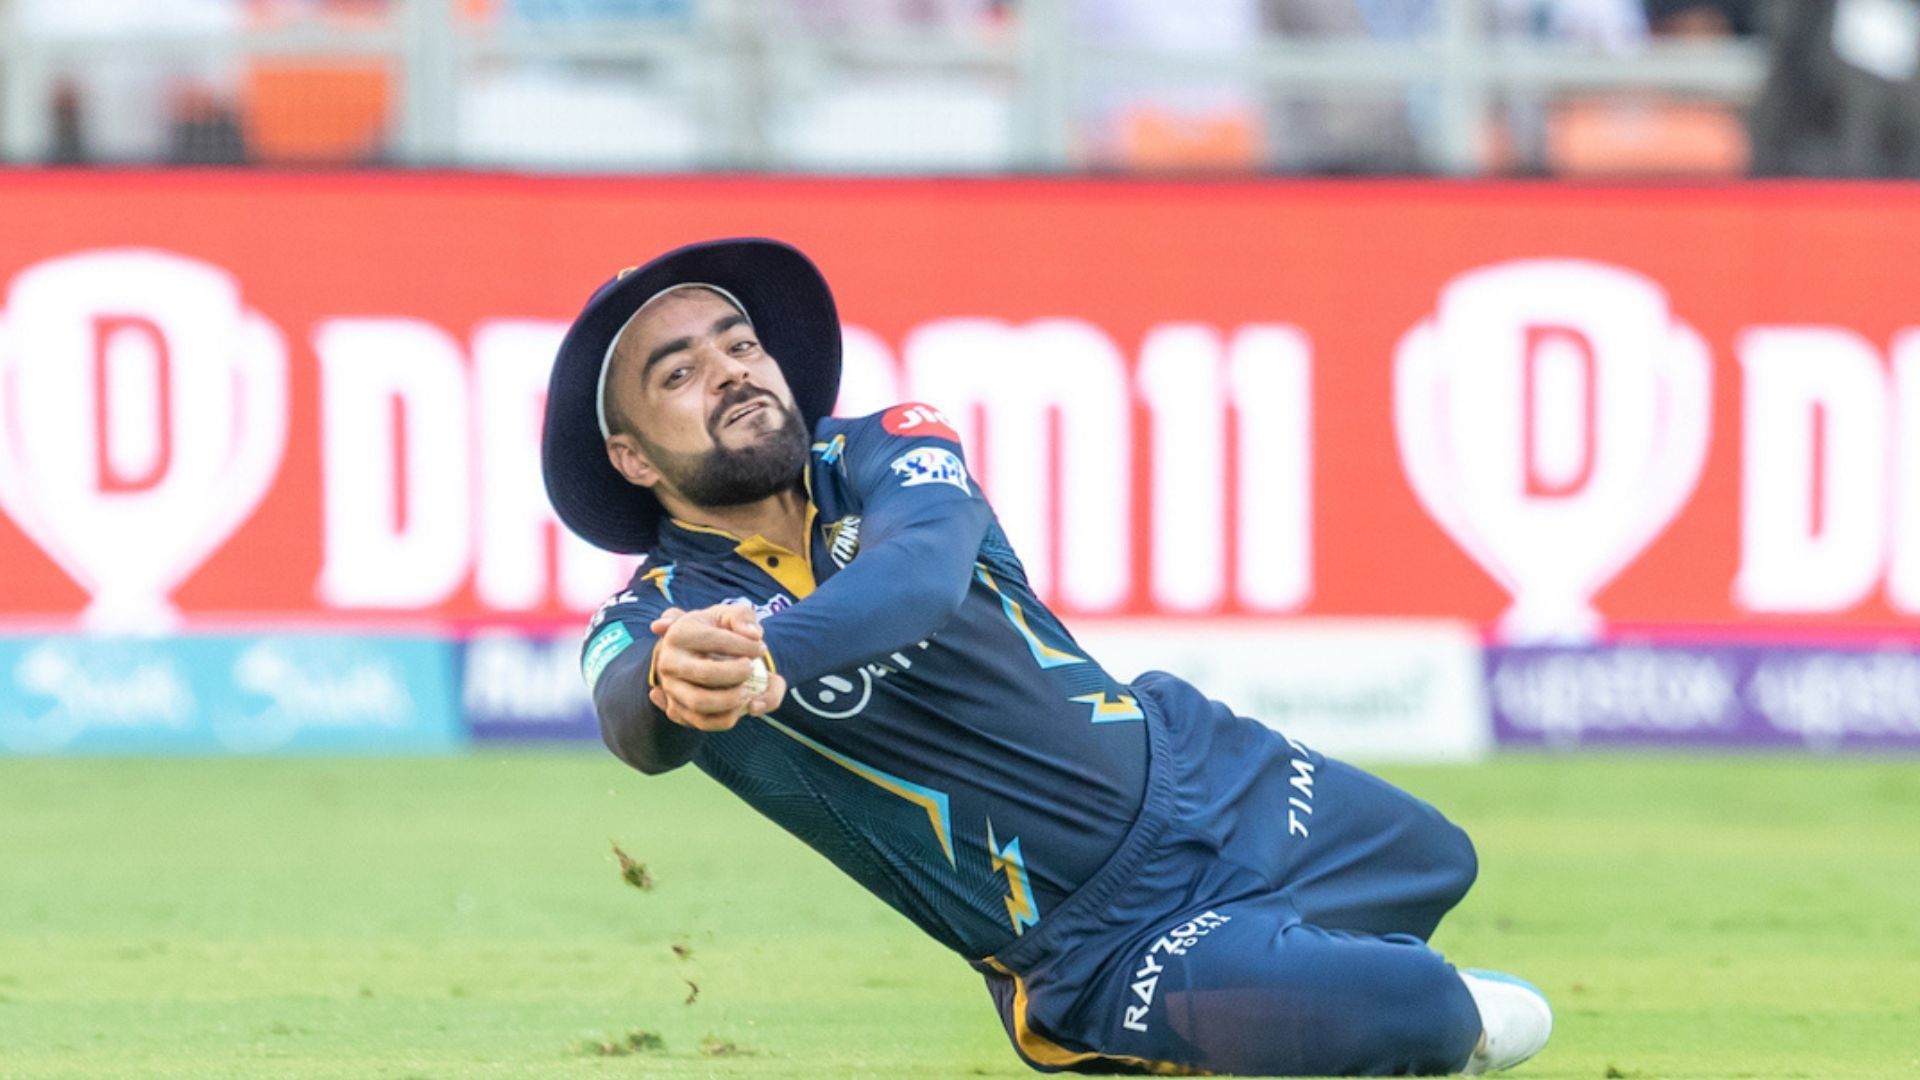 Rashid Khan took a stunning catch to dismiss Kyle Mayers in a group game. 